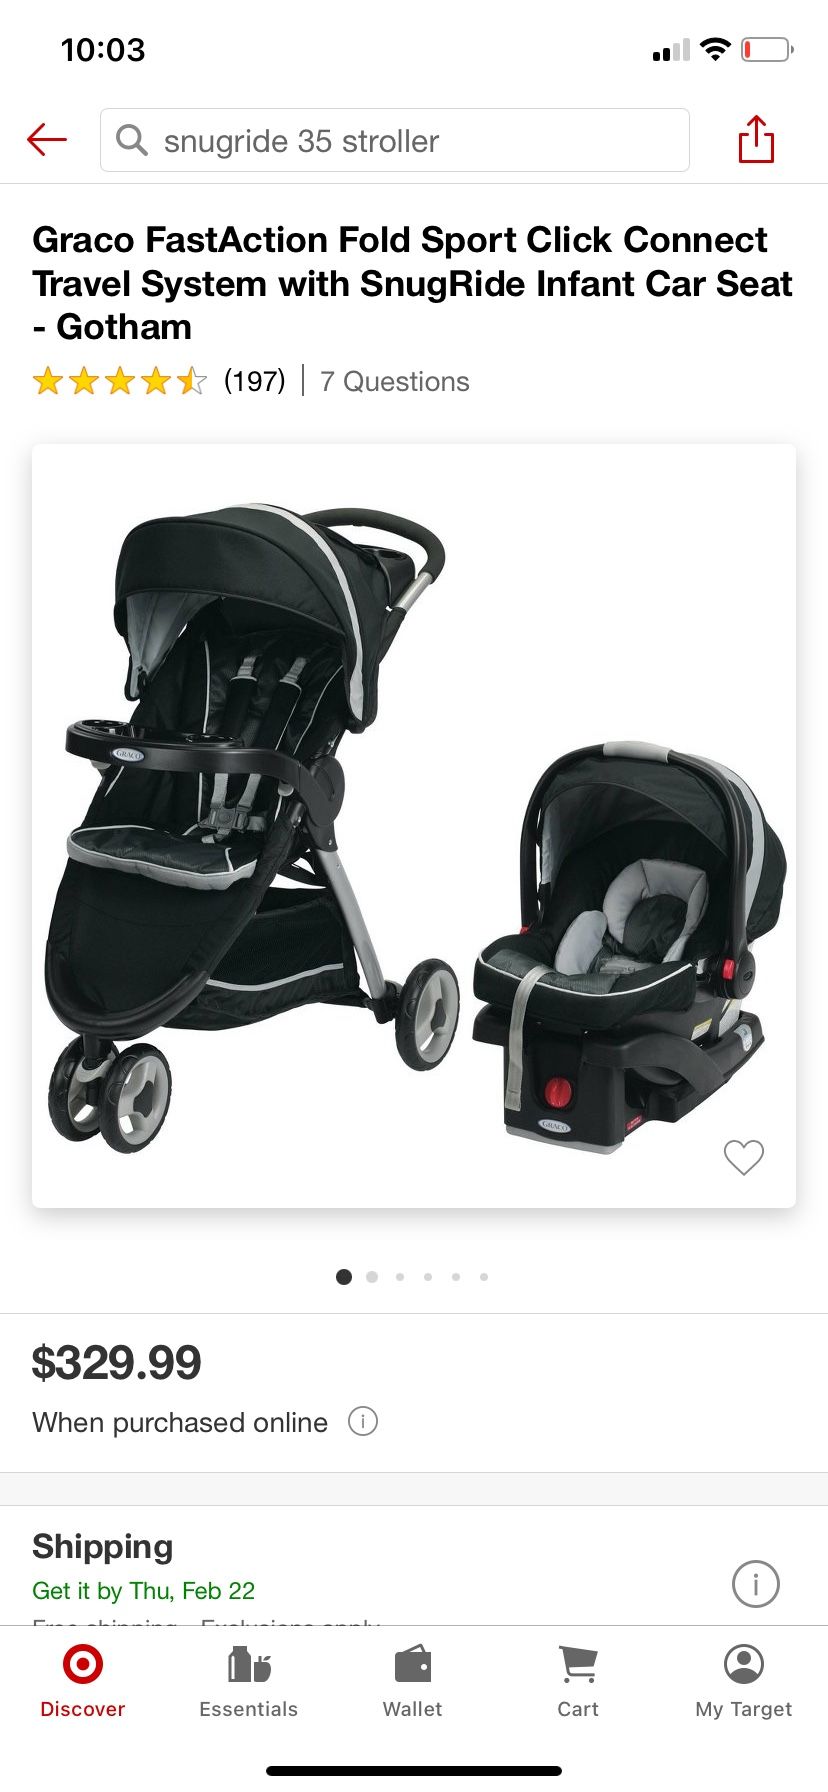 Graco Snugride 35 Car Seat And Stroller